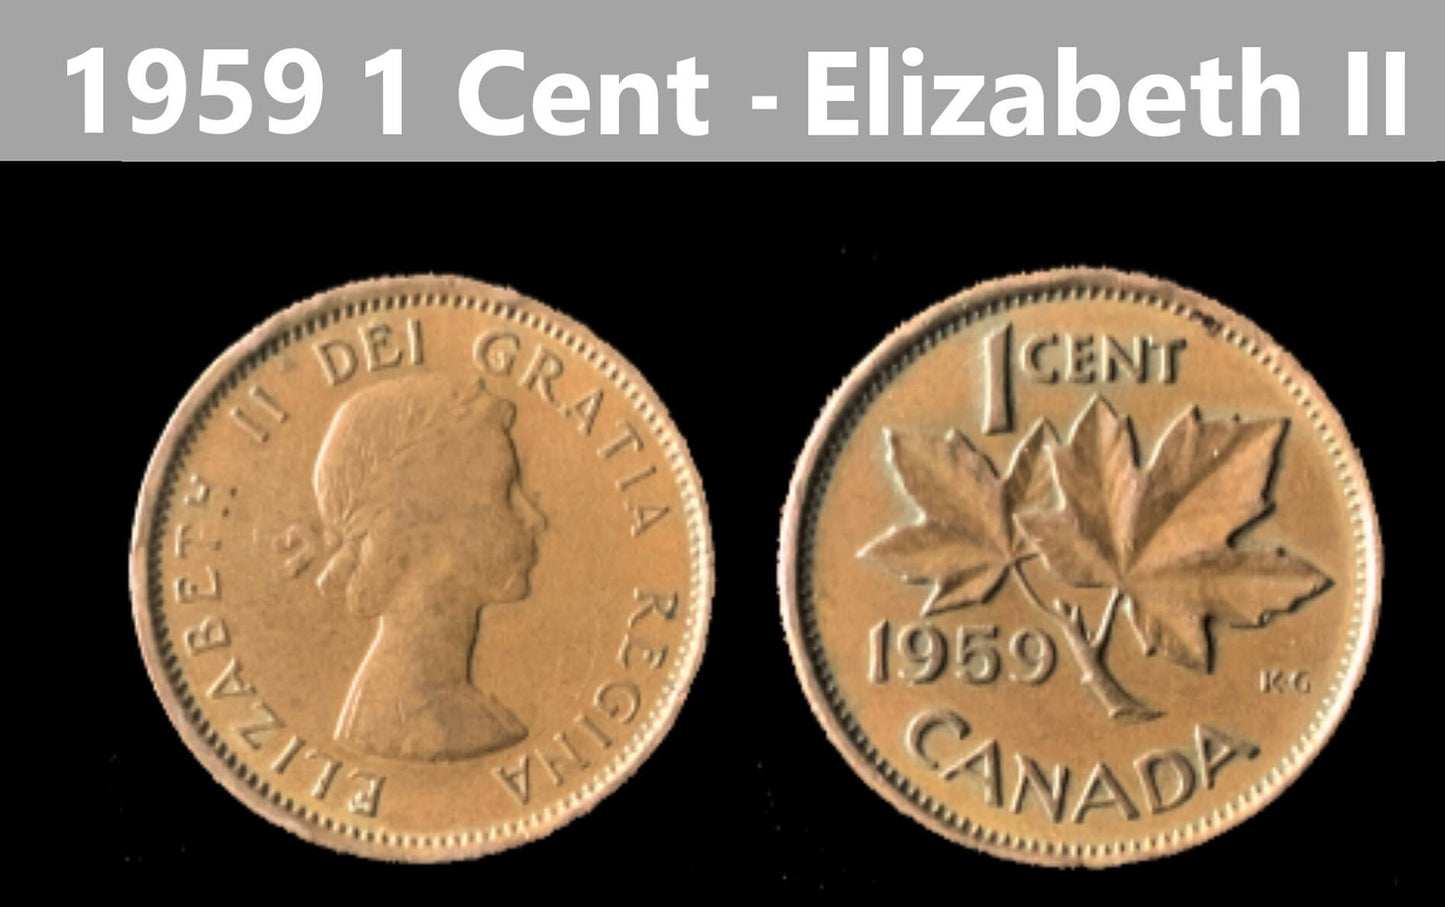 Canadian Small Cent - Elizabeth II- 1953 to 1959 - Canada - Select Year(s) / Quantity